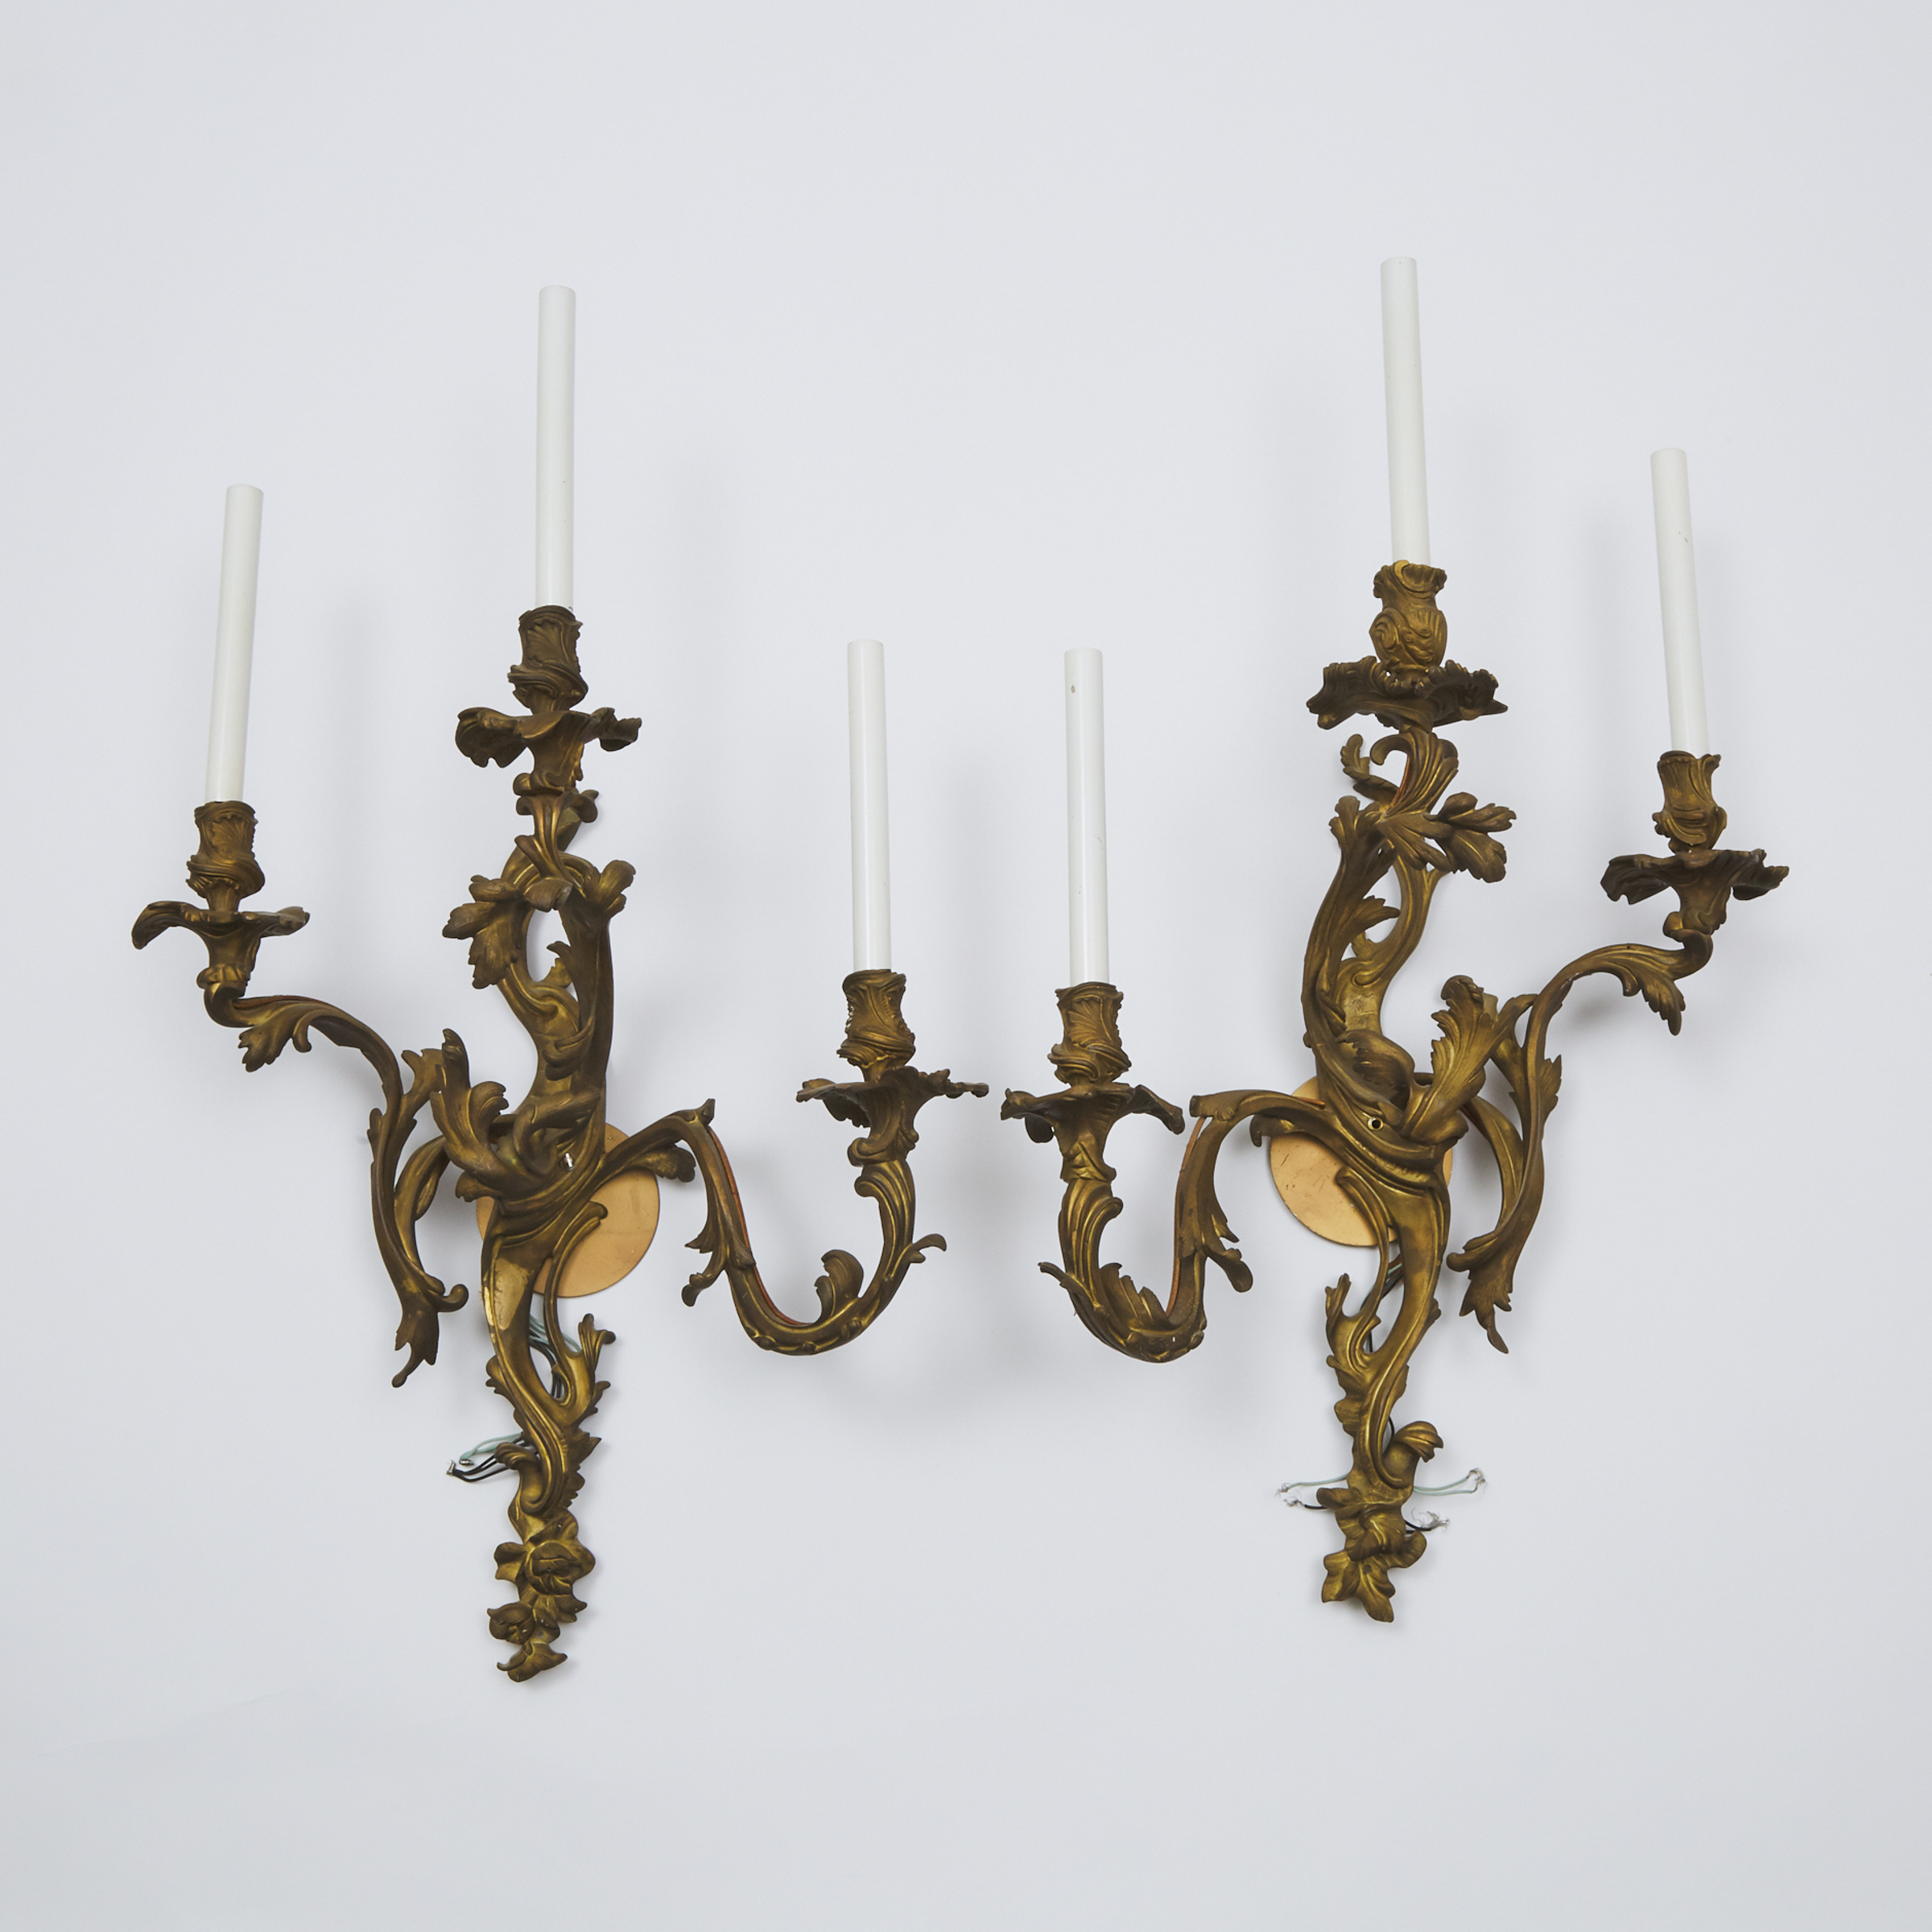 Large Pair of French Louis XV Rococo Style Gilt Bronze Three Light Wall Sconces, late 19th century